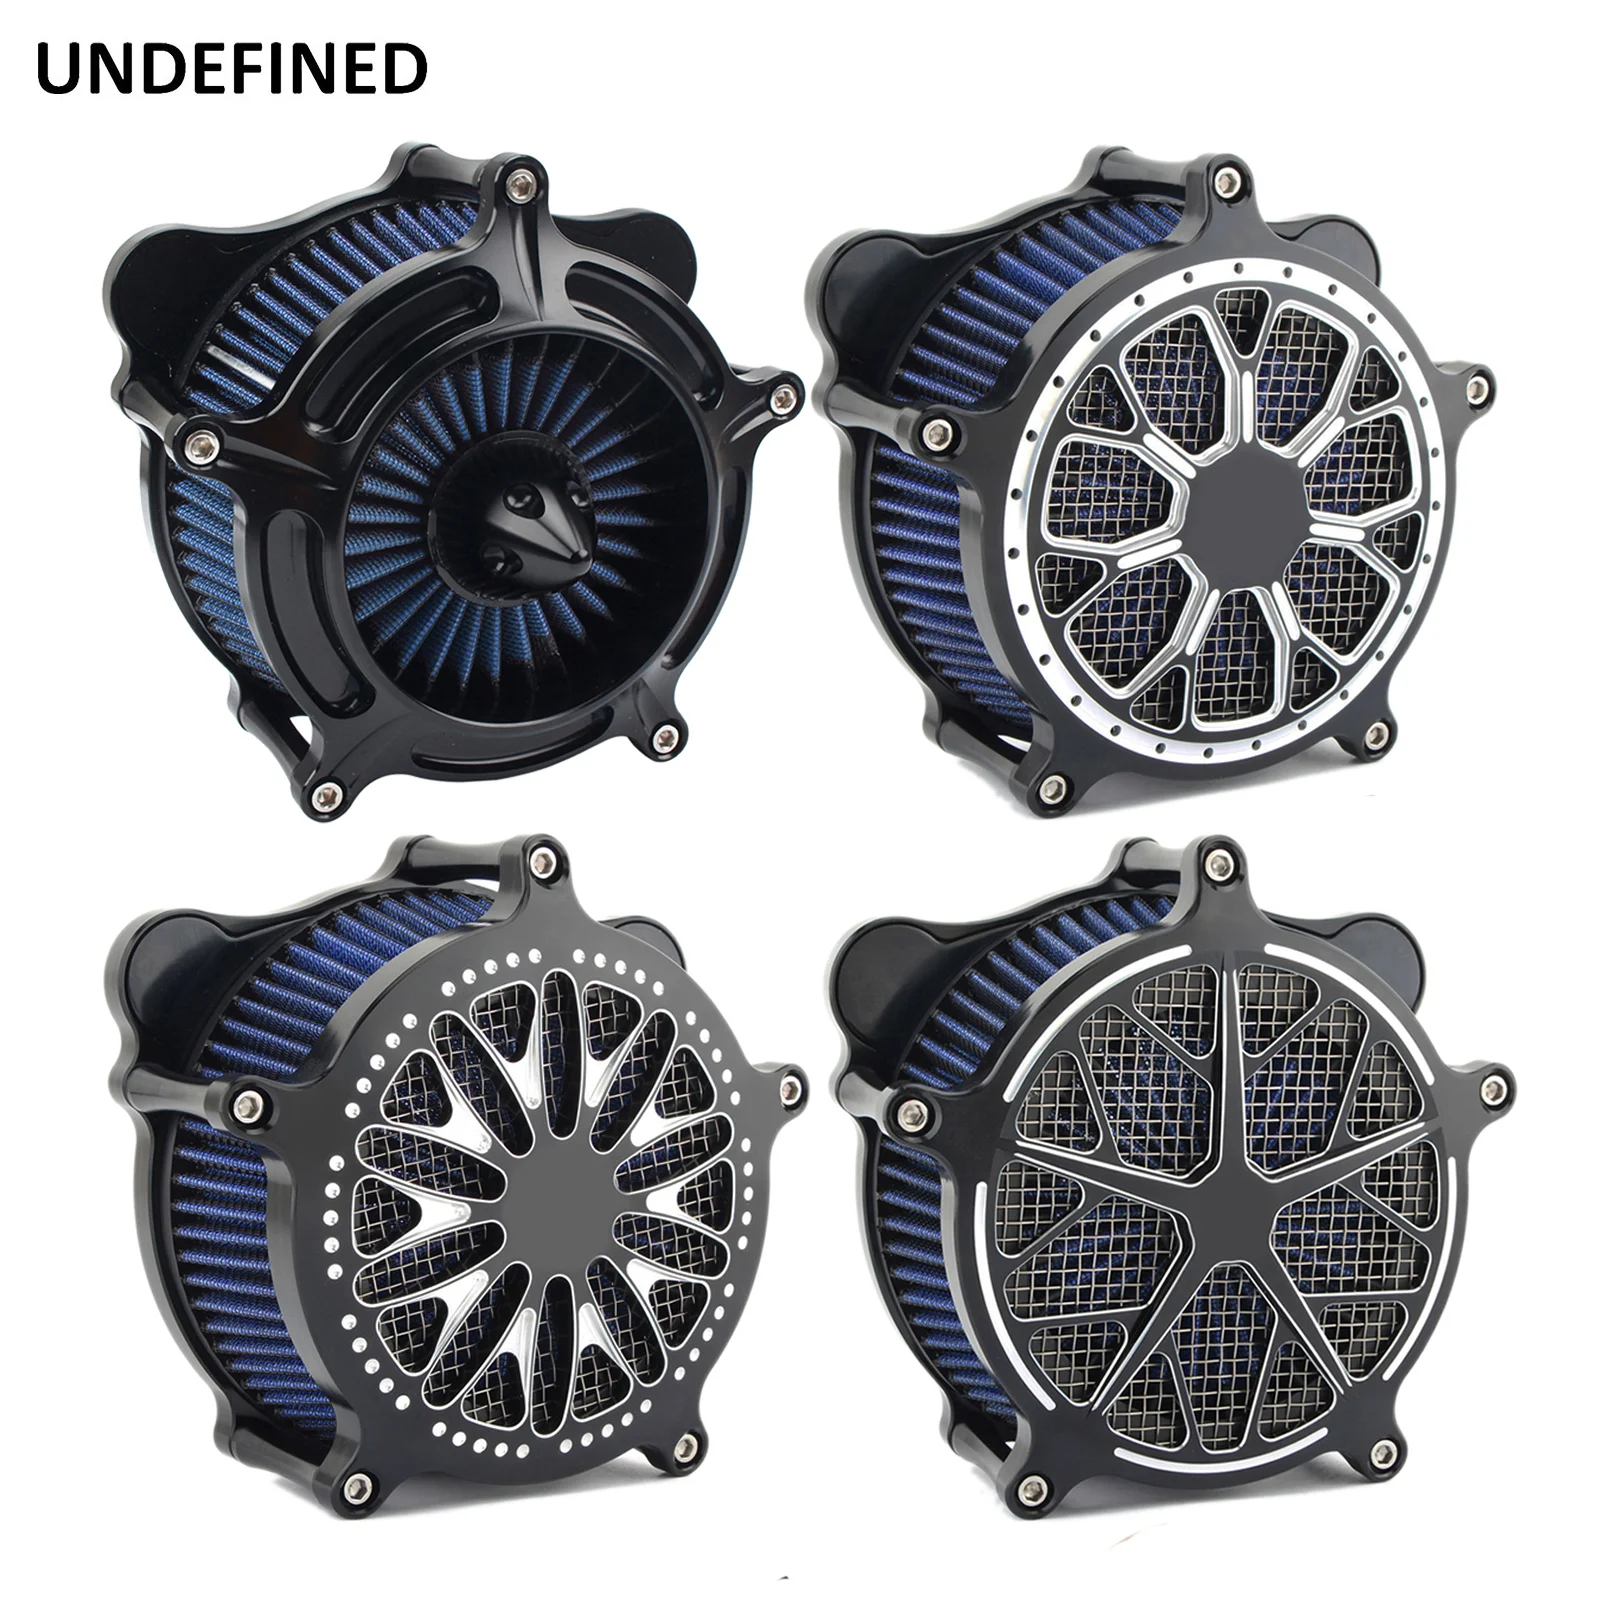 

Air Filter Spike Turbine Air Cleaner Intake System for Harley Touring Road Glide Street Glide 08-2016 Softail 16-2017 Dyna FXDLS